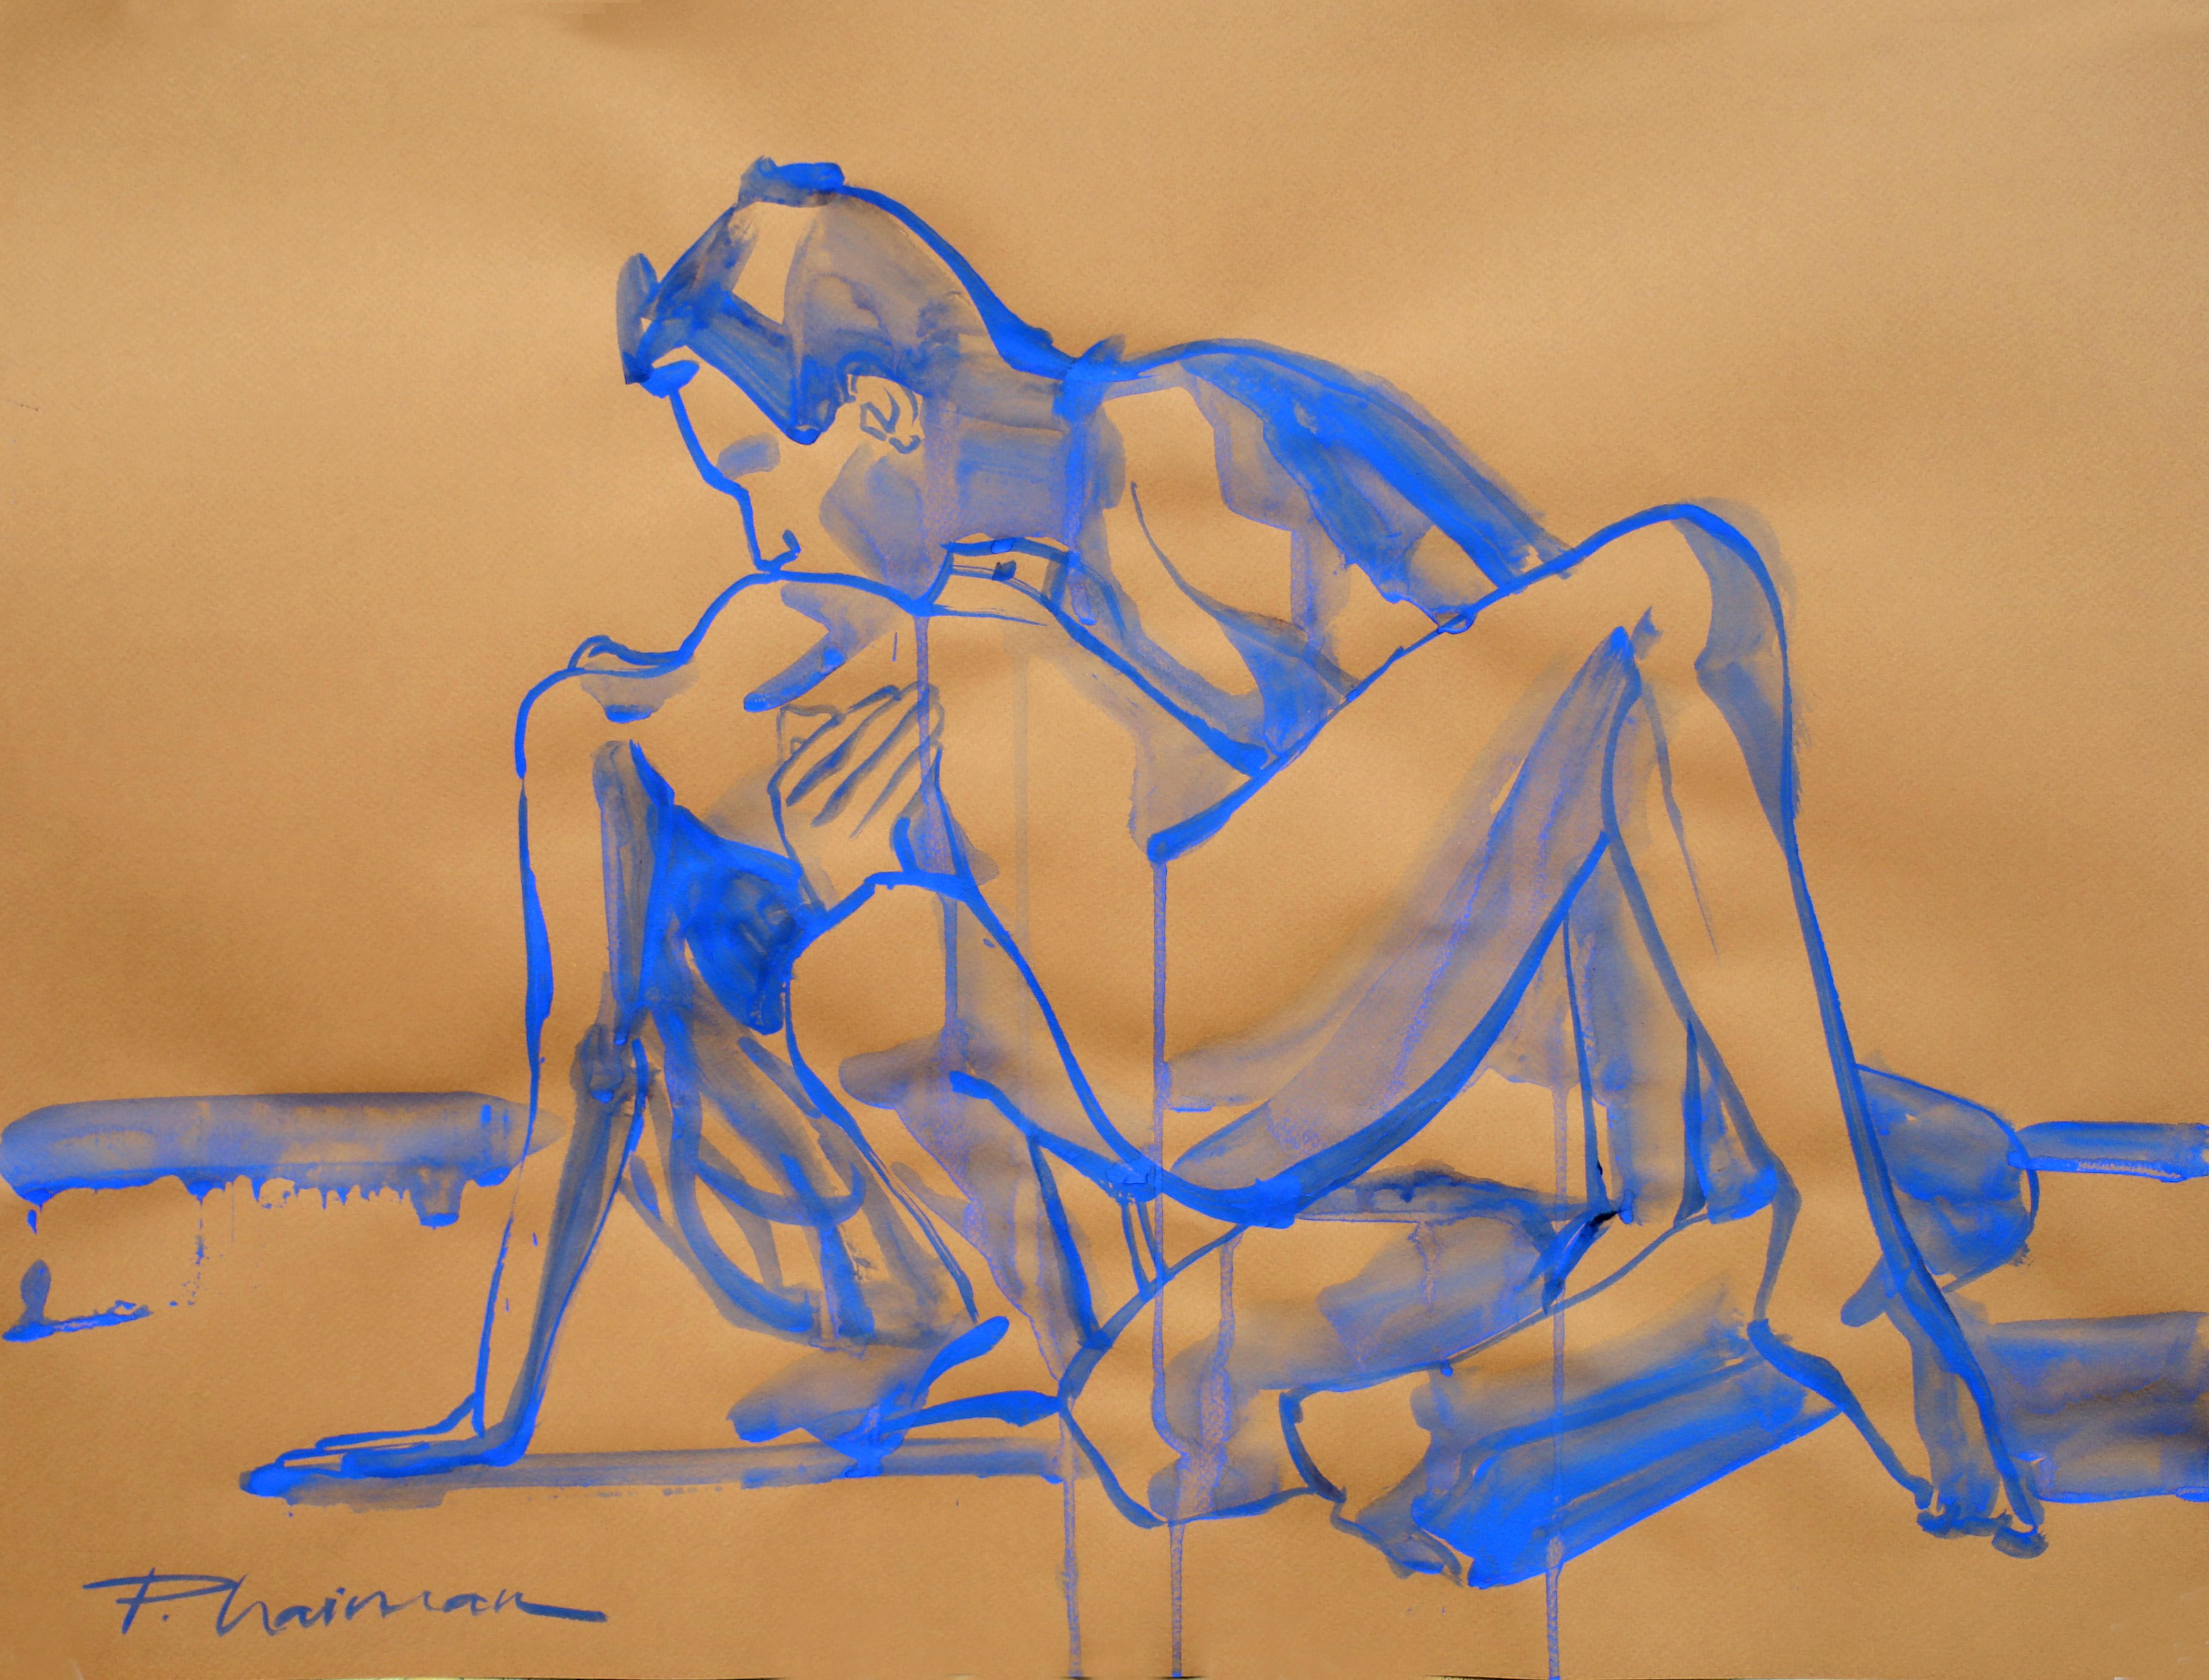 “Love is in the Air”
Nude couple in embrace.
Original drawing with blue ultramarine tempera  on paper.
Size 27.5x19.5in / 70x50cm . 

Shipped rolled in a tube, well packed.

Get free shipping with 1stdibs code.




